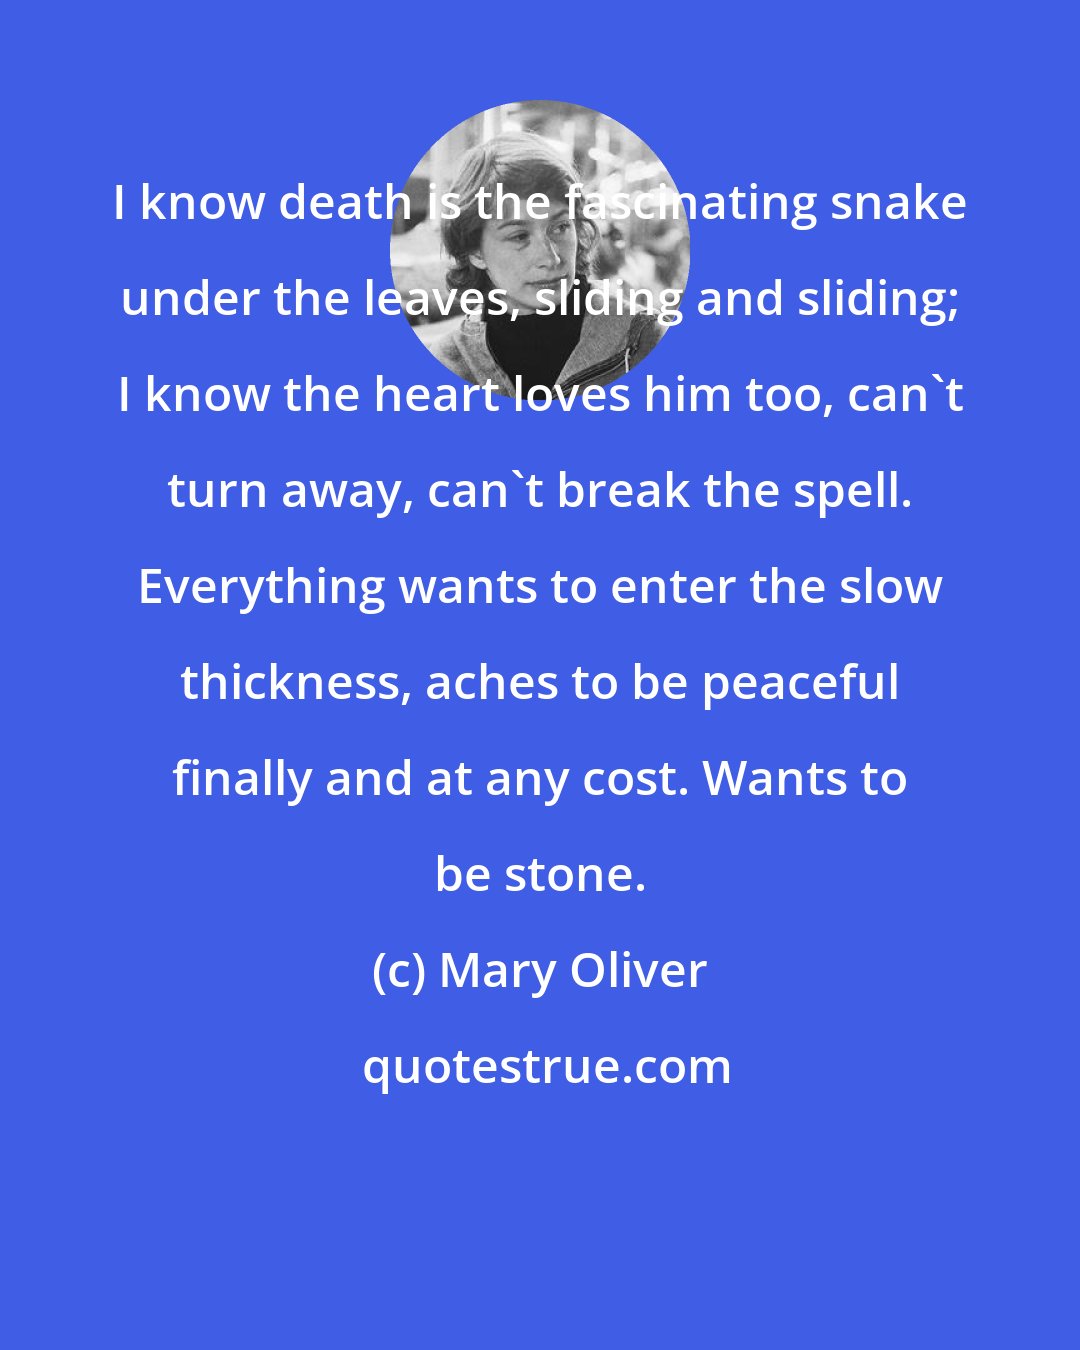 Mary Oliver: I know death is the fascinating snake under the leaves, sliding and sliding; I know the heart loves him too, can't turn away, can't break the spell. Everything wants to enter the slow thickness, aches to be peaceful finally and at any cost. Wants to be stone.